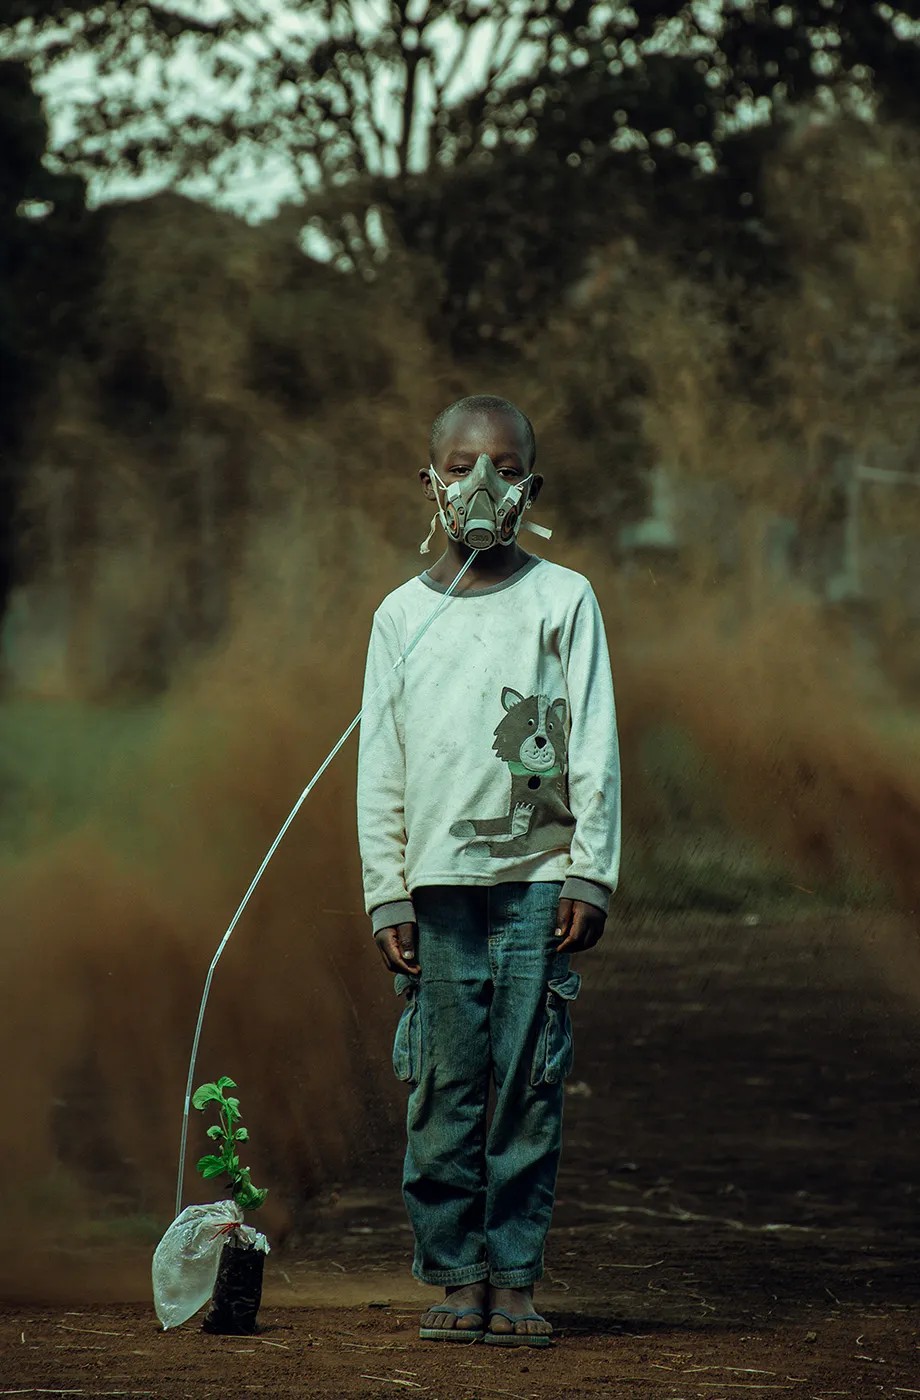 A young boy takes in air from the plant in this symbolic image taken in Kenya, while a sand storm brews in the background. The last breath by Kevin Ochieng Onyango, 2021. By courtesy of the photographer and Environmental Photographer of the Year 2021